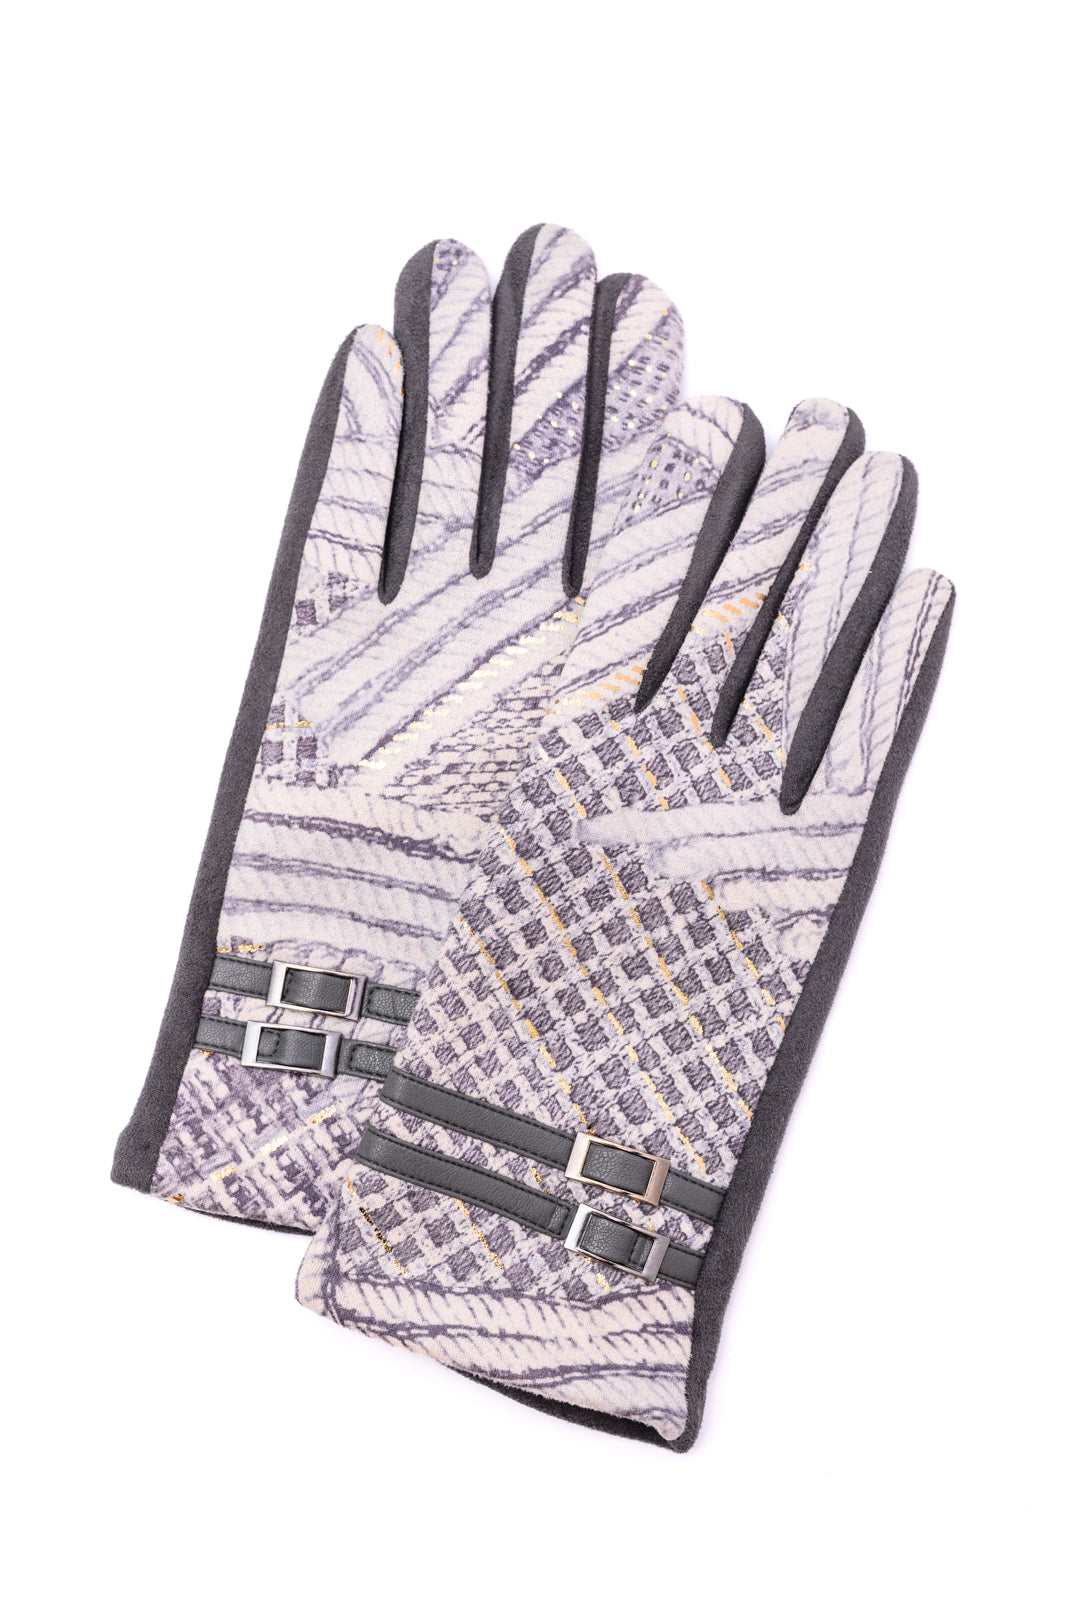 Textured and Buckled Gloves